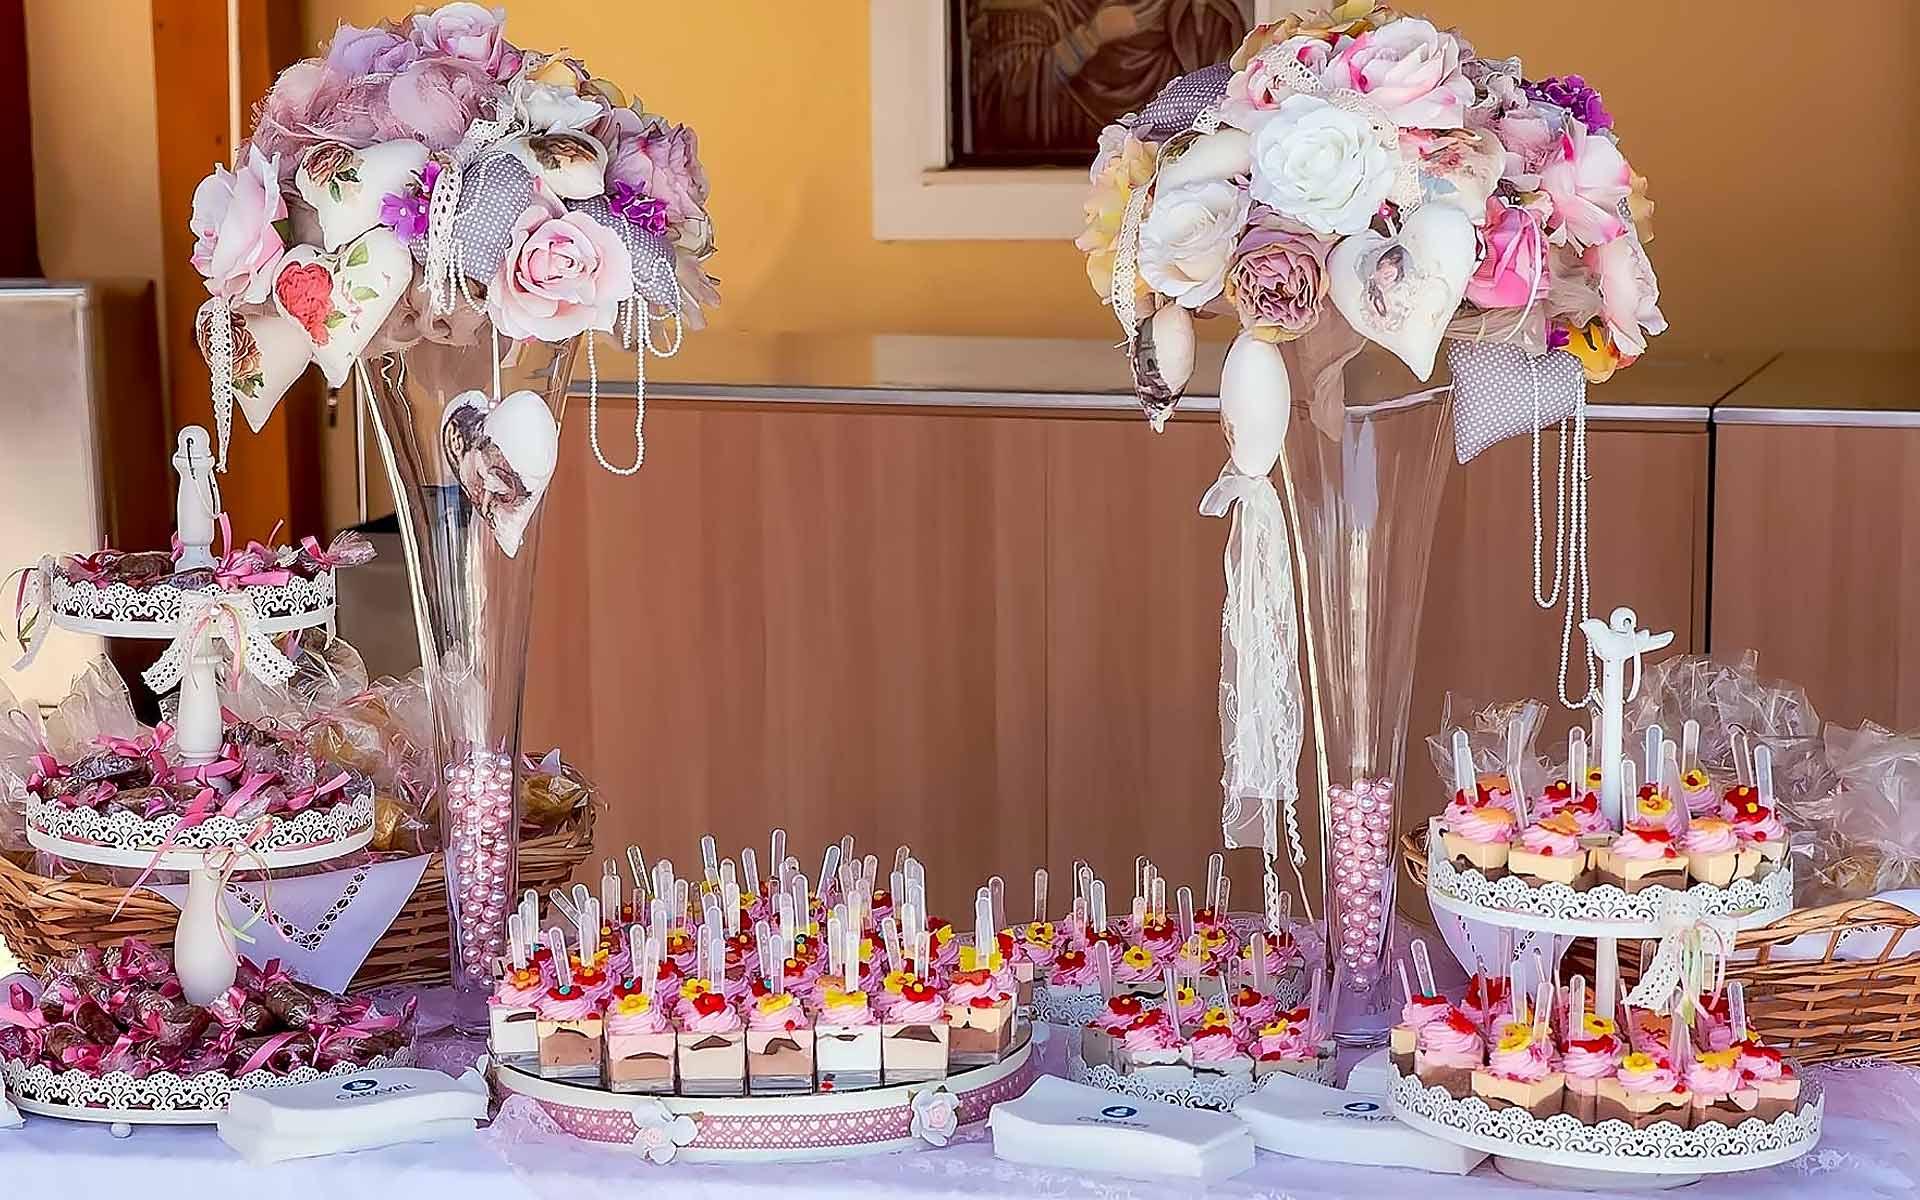 Tailor-Made-Baptism-Dessert-Table-With-Pastel-Fabrics-In-Big-Vases